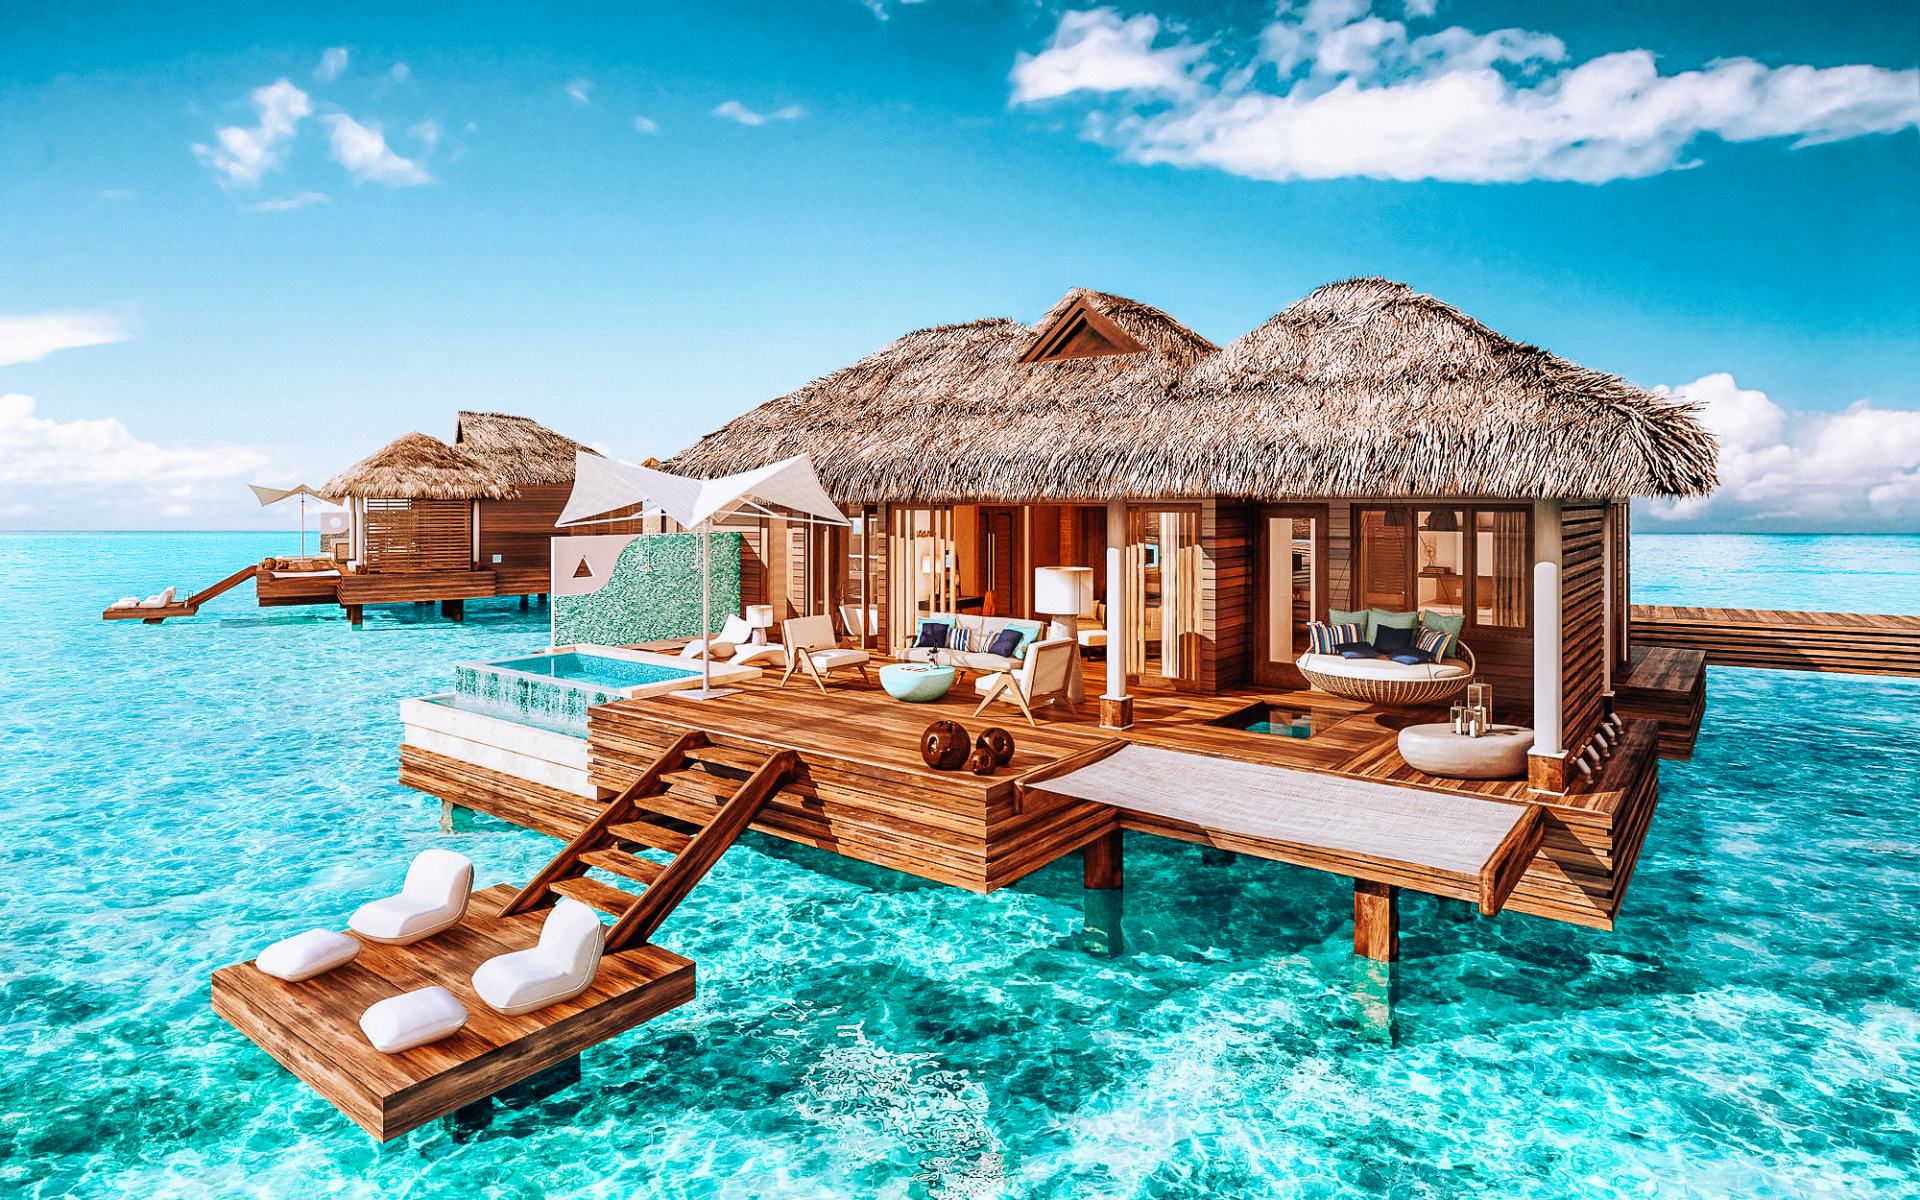 Top 5 Islands For Overwater Bungalows Goway - vrogue.co